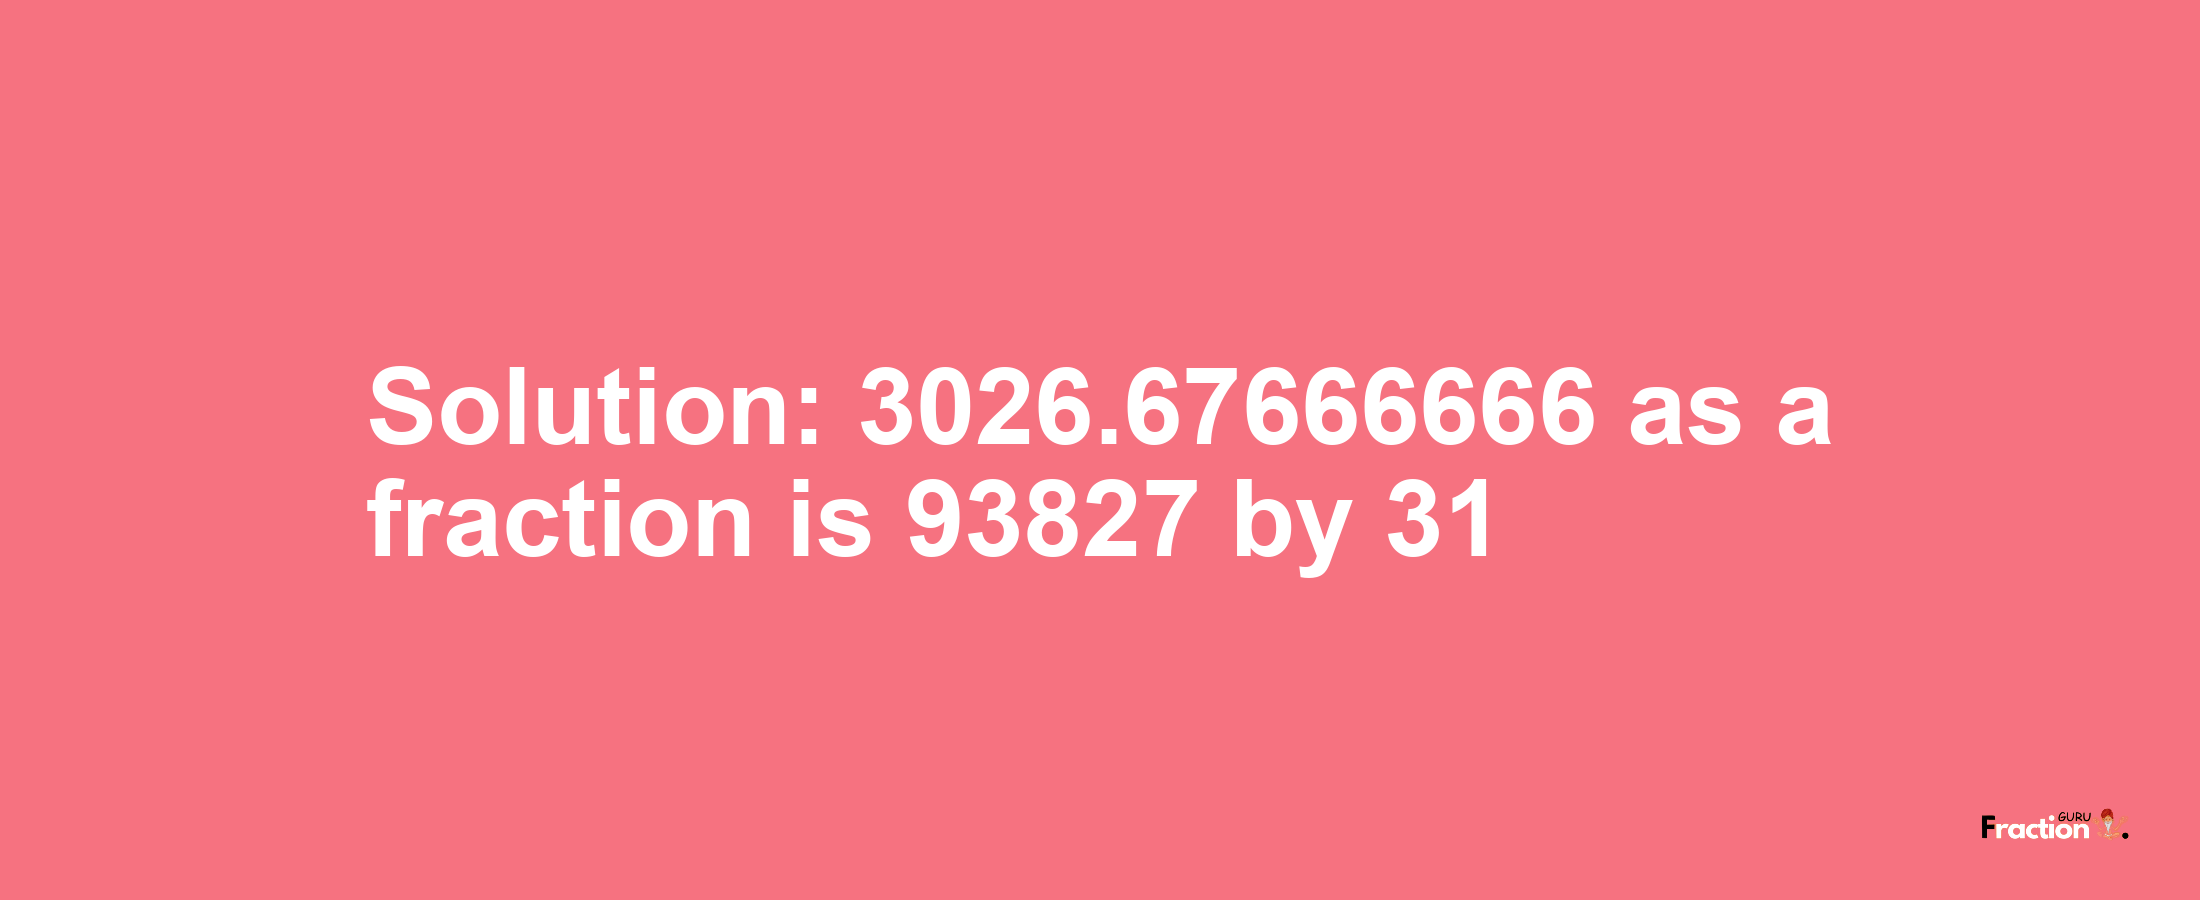 Solution:3026.67666666 as a fraction is 93827/31